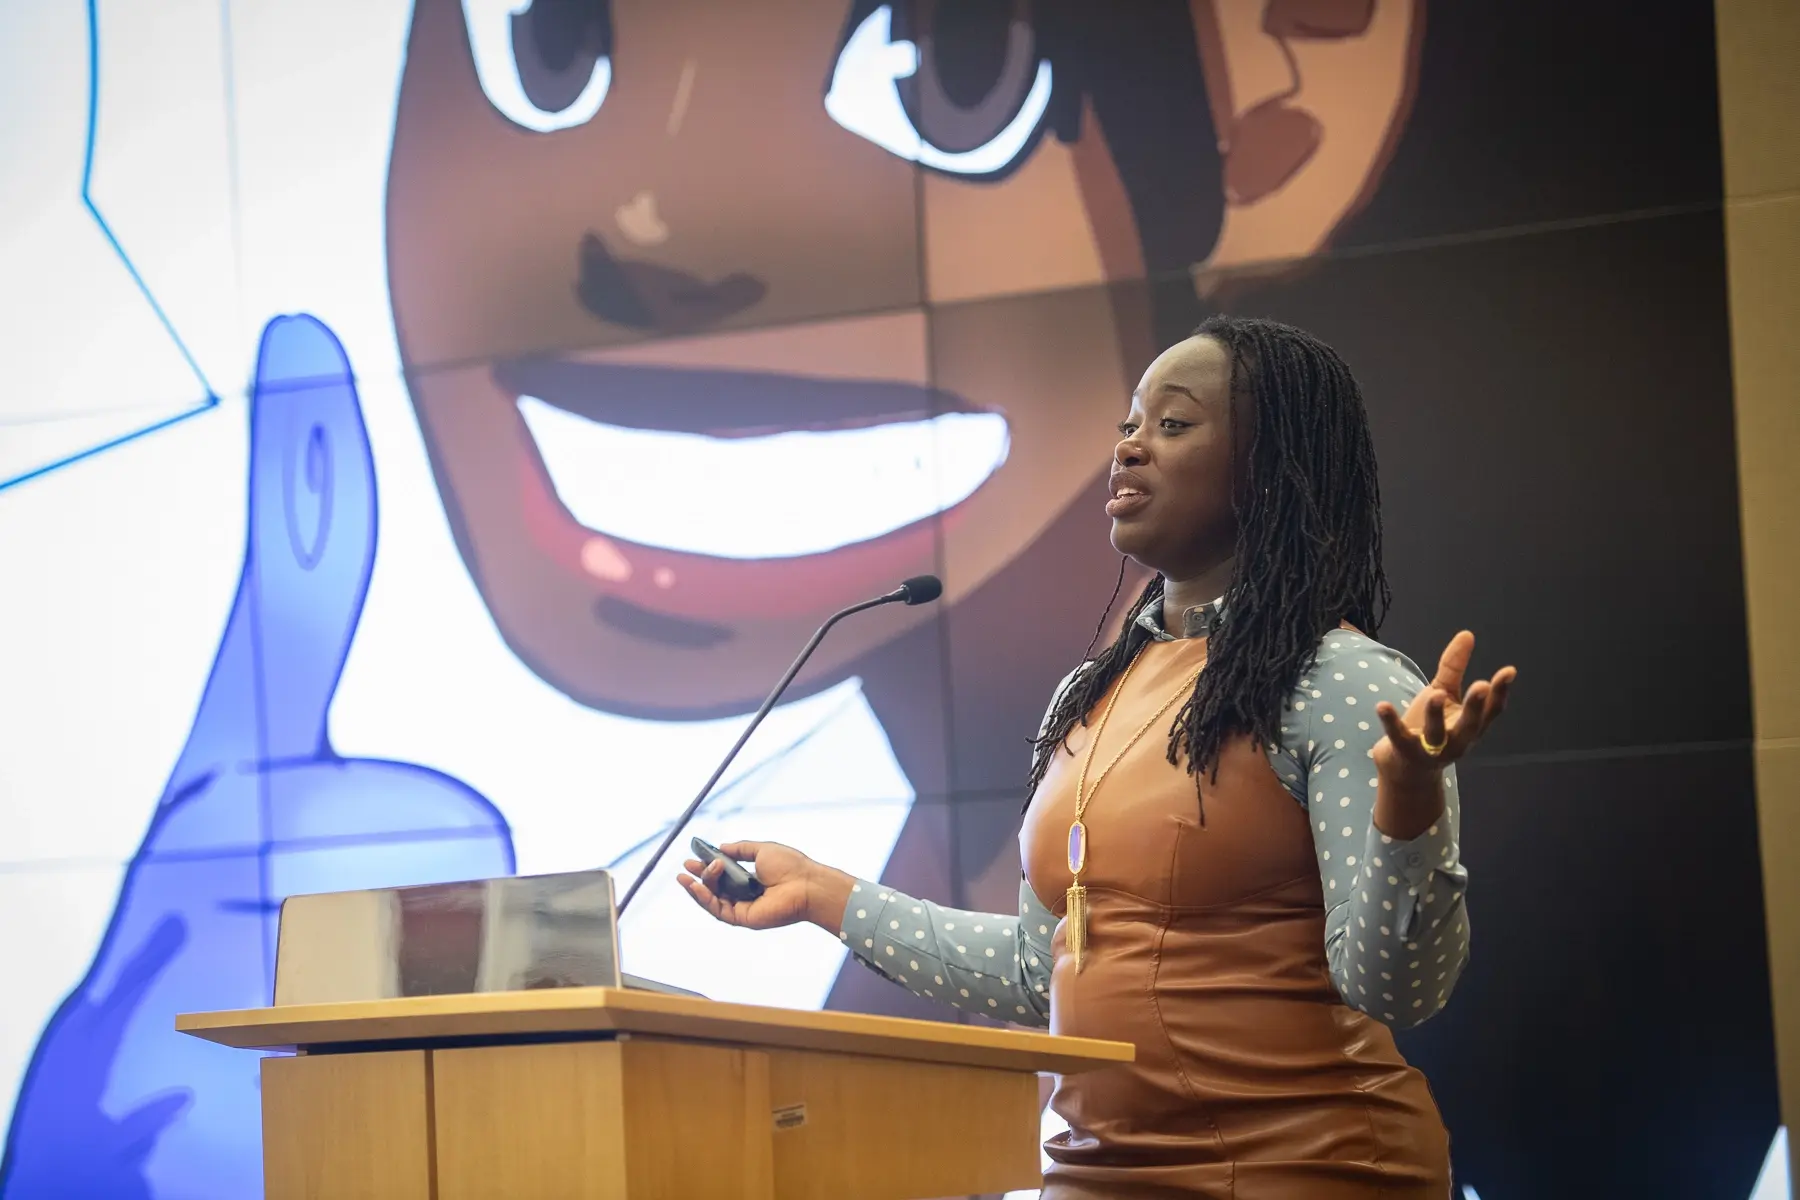 Art, medicine and advocacy intersect in VCU Black History Month address